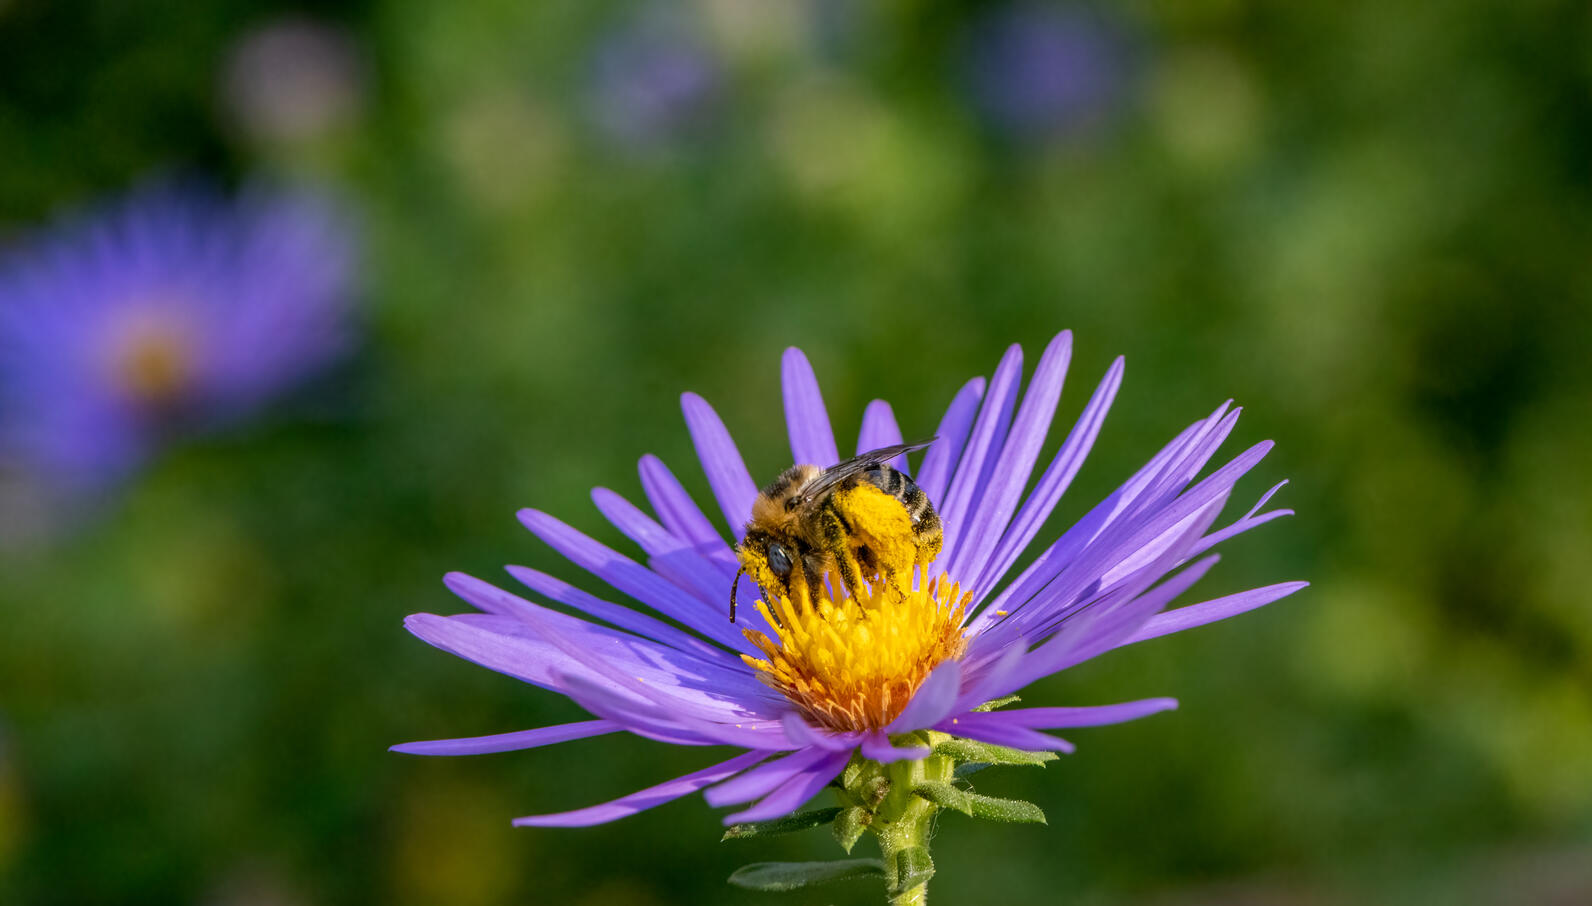 Aromatic Aster in bloom